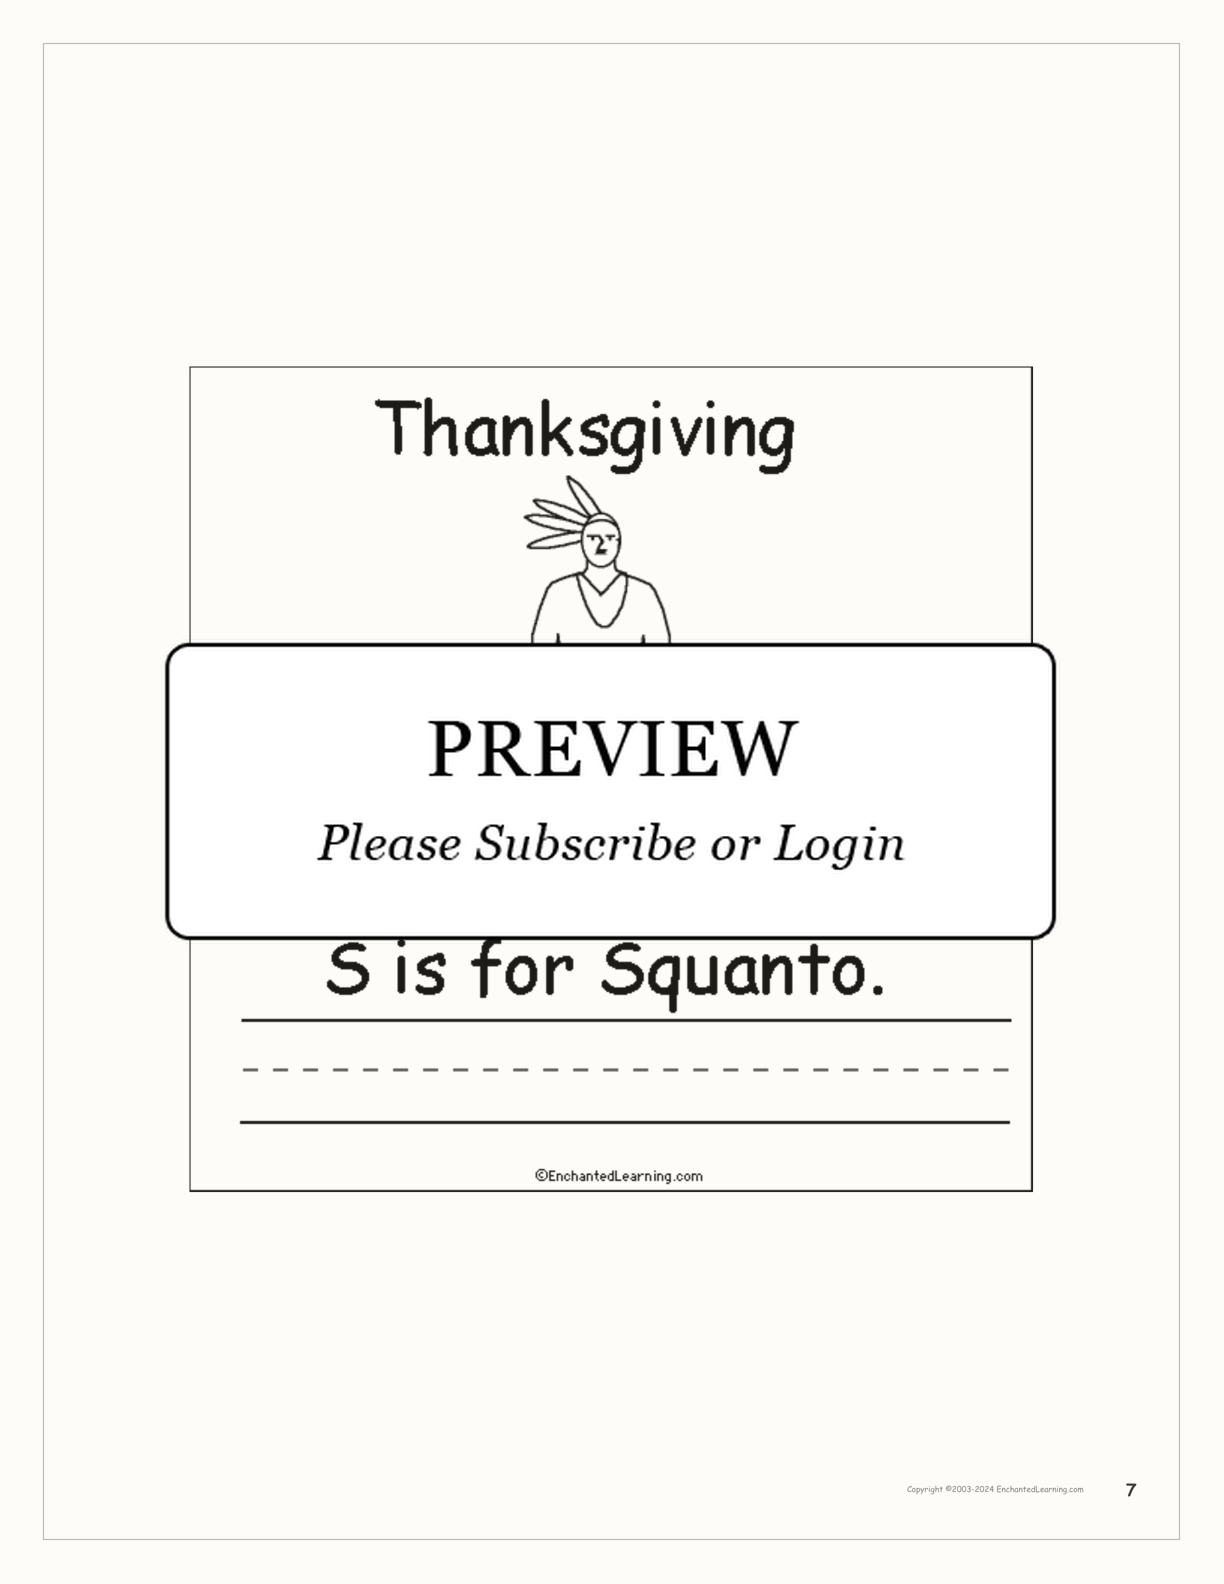 'Thanksgiving is for...' Book for Early Readers interactive printout page 7